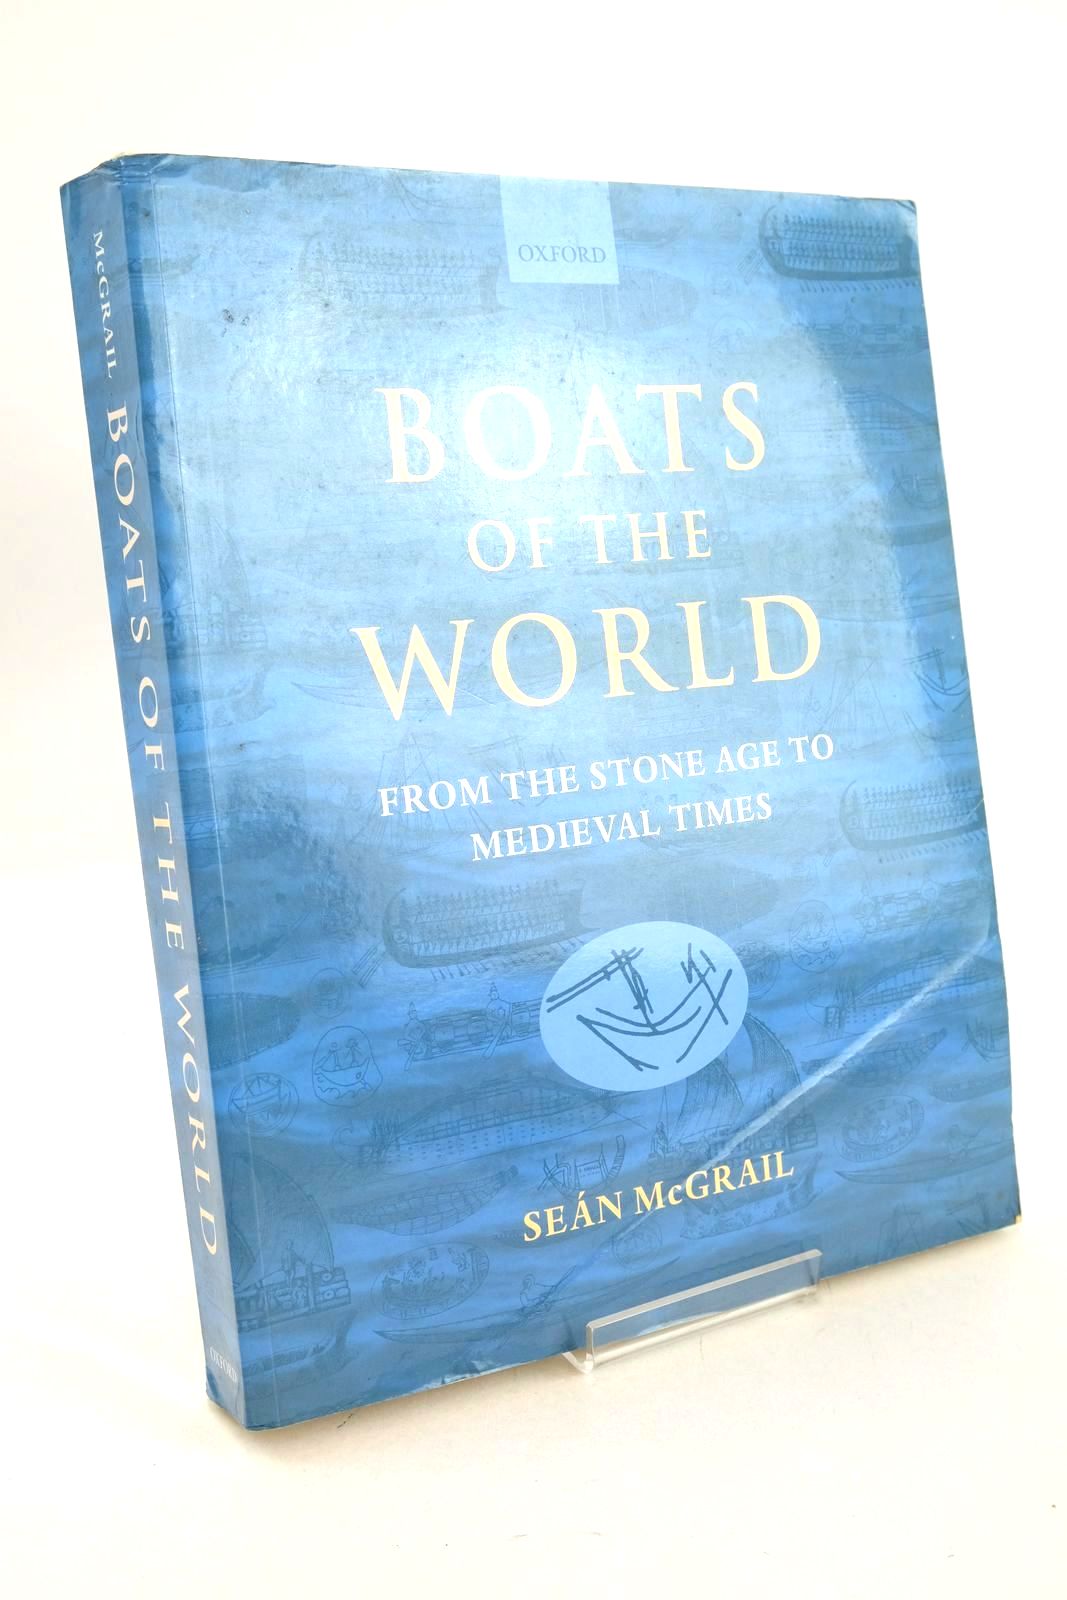 Photo of BOATS OF THE WORLD: FROM THE STONE AGE TO MEDIEVAL TIMES written by McGrail, Sean published by Oxford University Press (STOCK CODE: 1327034)  for sale by Stella & Rose's Books